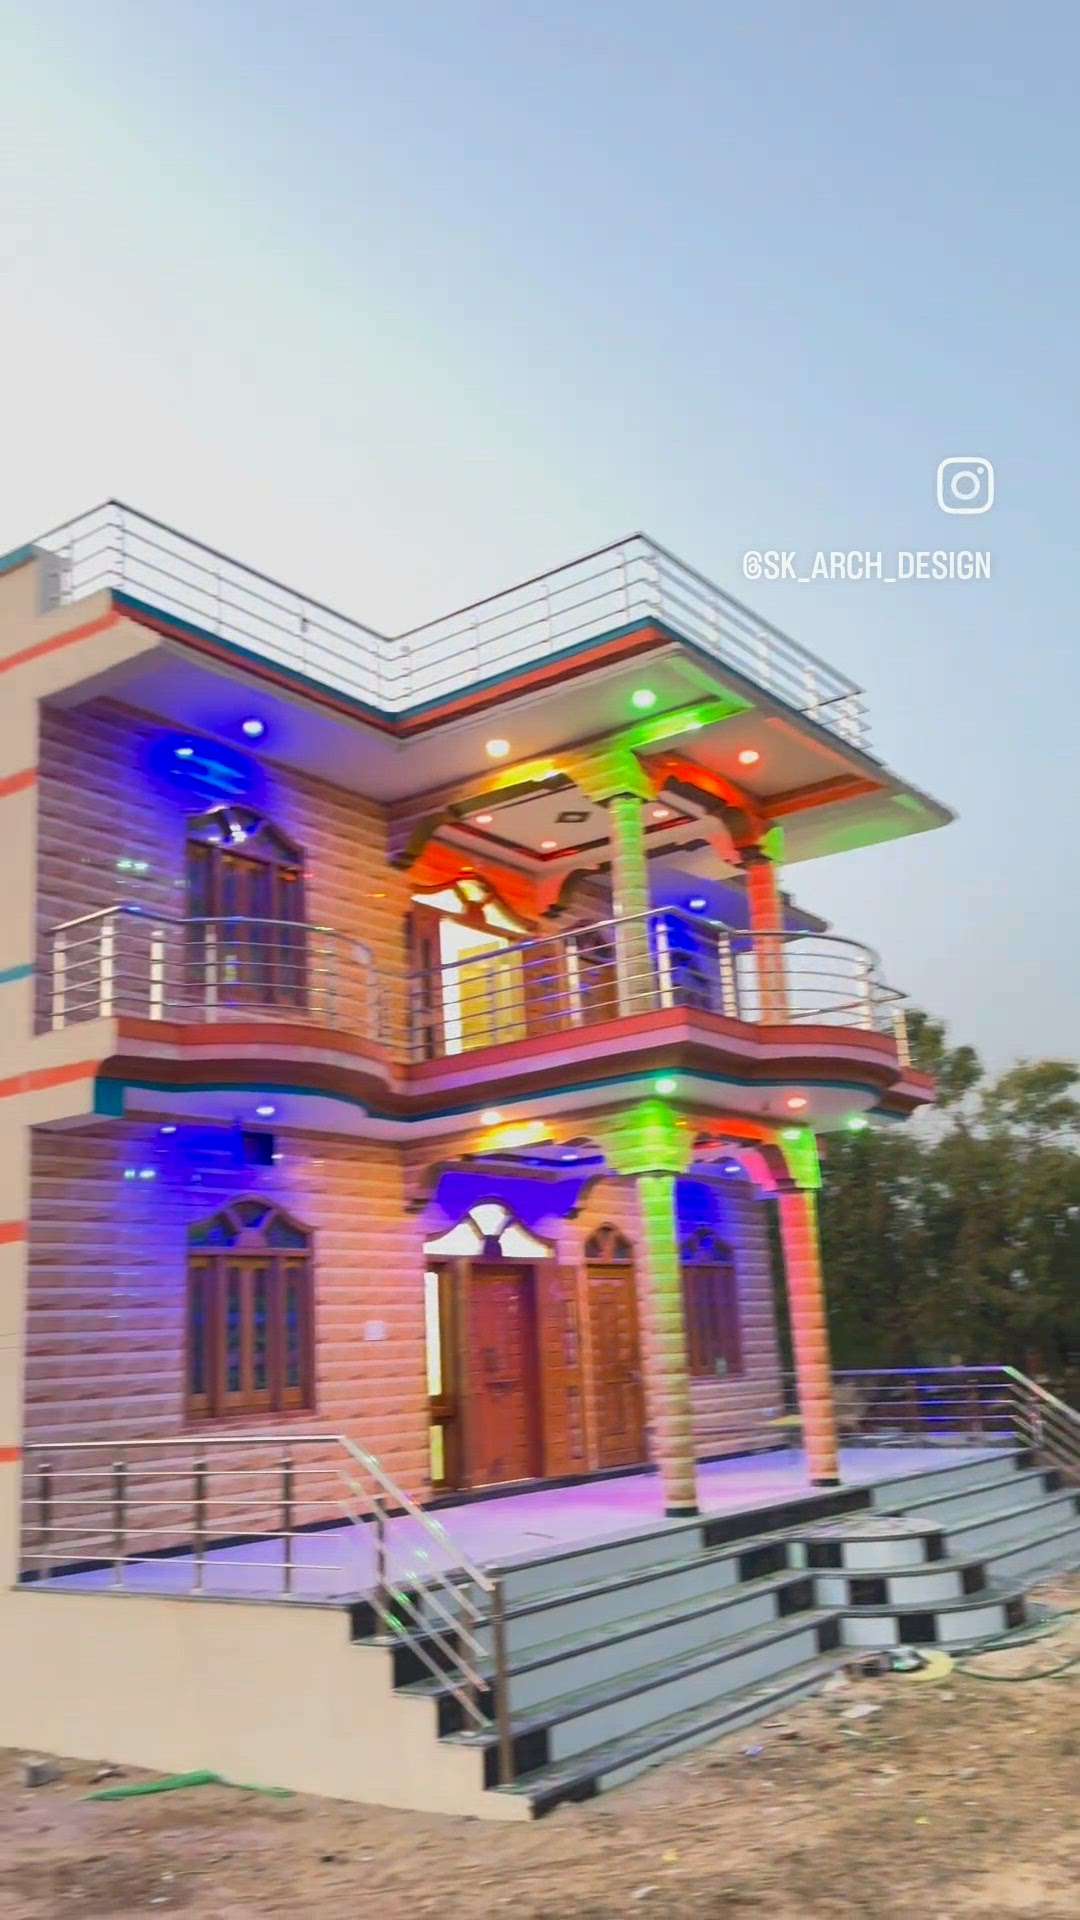 Elevation Kothi Design Refresh 
.
.
Make 2D,3D according to vastu sastra give your plot size and requirements Tell me
(वास्तु शास्त्र से घर के नक्शे और डिजाईन बनवाने के लिए आप हम से  संपर्क कर सकते है )
Architect and Exterior, Interior Designer
.
Contact me on - 
SK ARCH DESIGN JAIPUR 
Email - skarchitects96@gmail.com
Website - www.skarchdesign96.com
Google - https://g.co/kgs/3zKqgE
Whatsapp - 
https://wa.me/message/ZNMVUL3RAHHDB1
Instagram - https://instagram.com/sk_arch_design?igshid=ZDdkNTZiNTM=
YouTube -https://youtube.com/@SKARCHDESIGN
Teligram -https://t.me/skarchitects96

Whatsapp - +918000810298
Contact- +918000810298
.
.
#exterior_Work #InteriorDesigner #HouseDesigns #houseplanning #Structural_Drawing #HouseConstruction #Architectural&nterior #designers #Electrical #rcpdrawing #coloumn_footing #StructureEngineer #plumbingdrawing #TraditionalHouse #Designs #houseviews #KitchenIdeas #roominterior #FlooringSolutions #FloorPlans #exteriordesigners